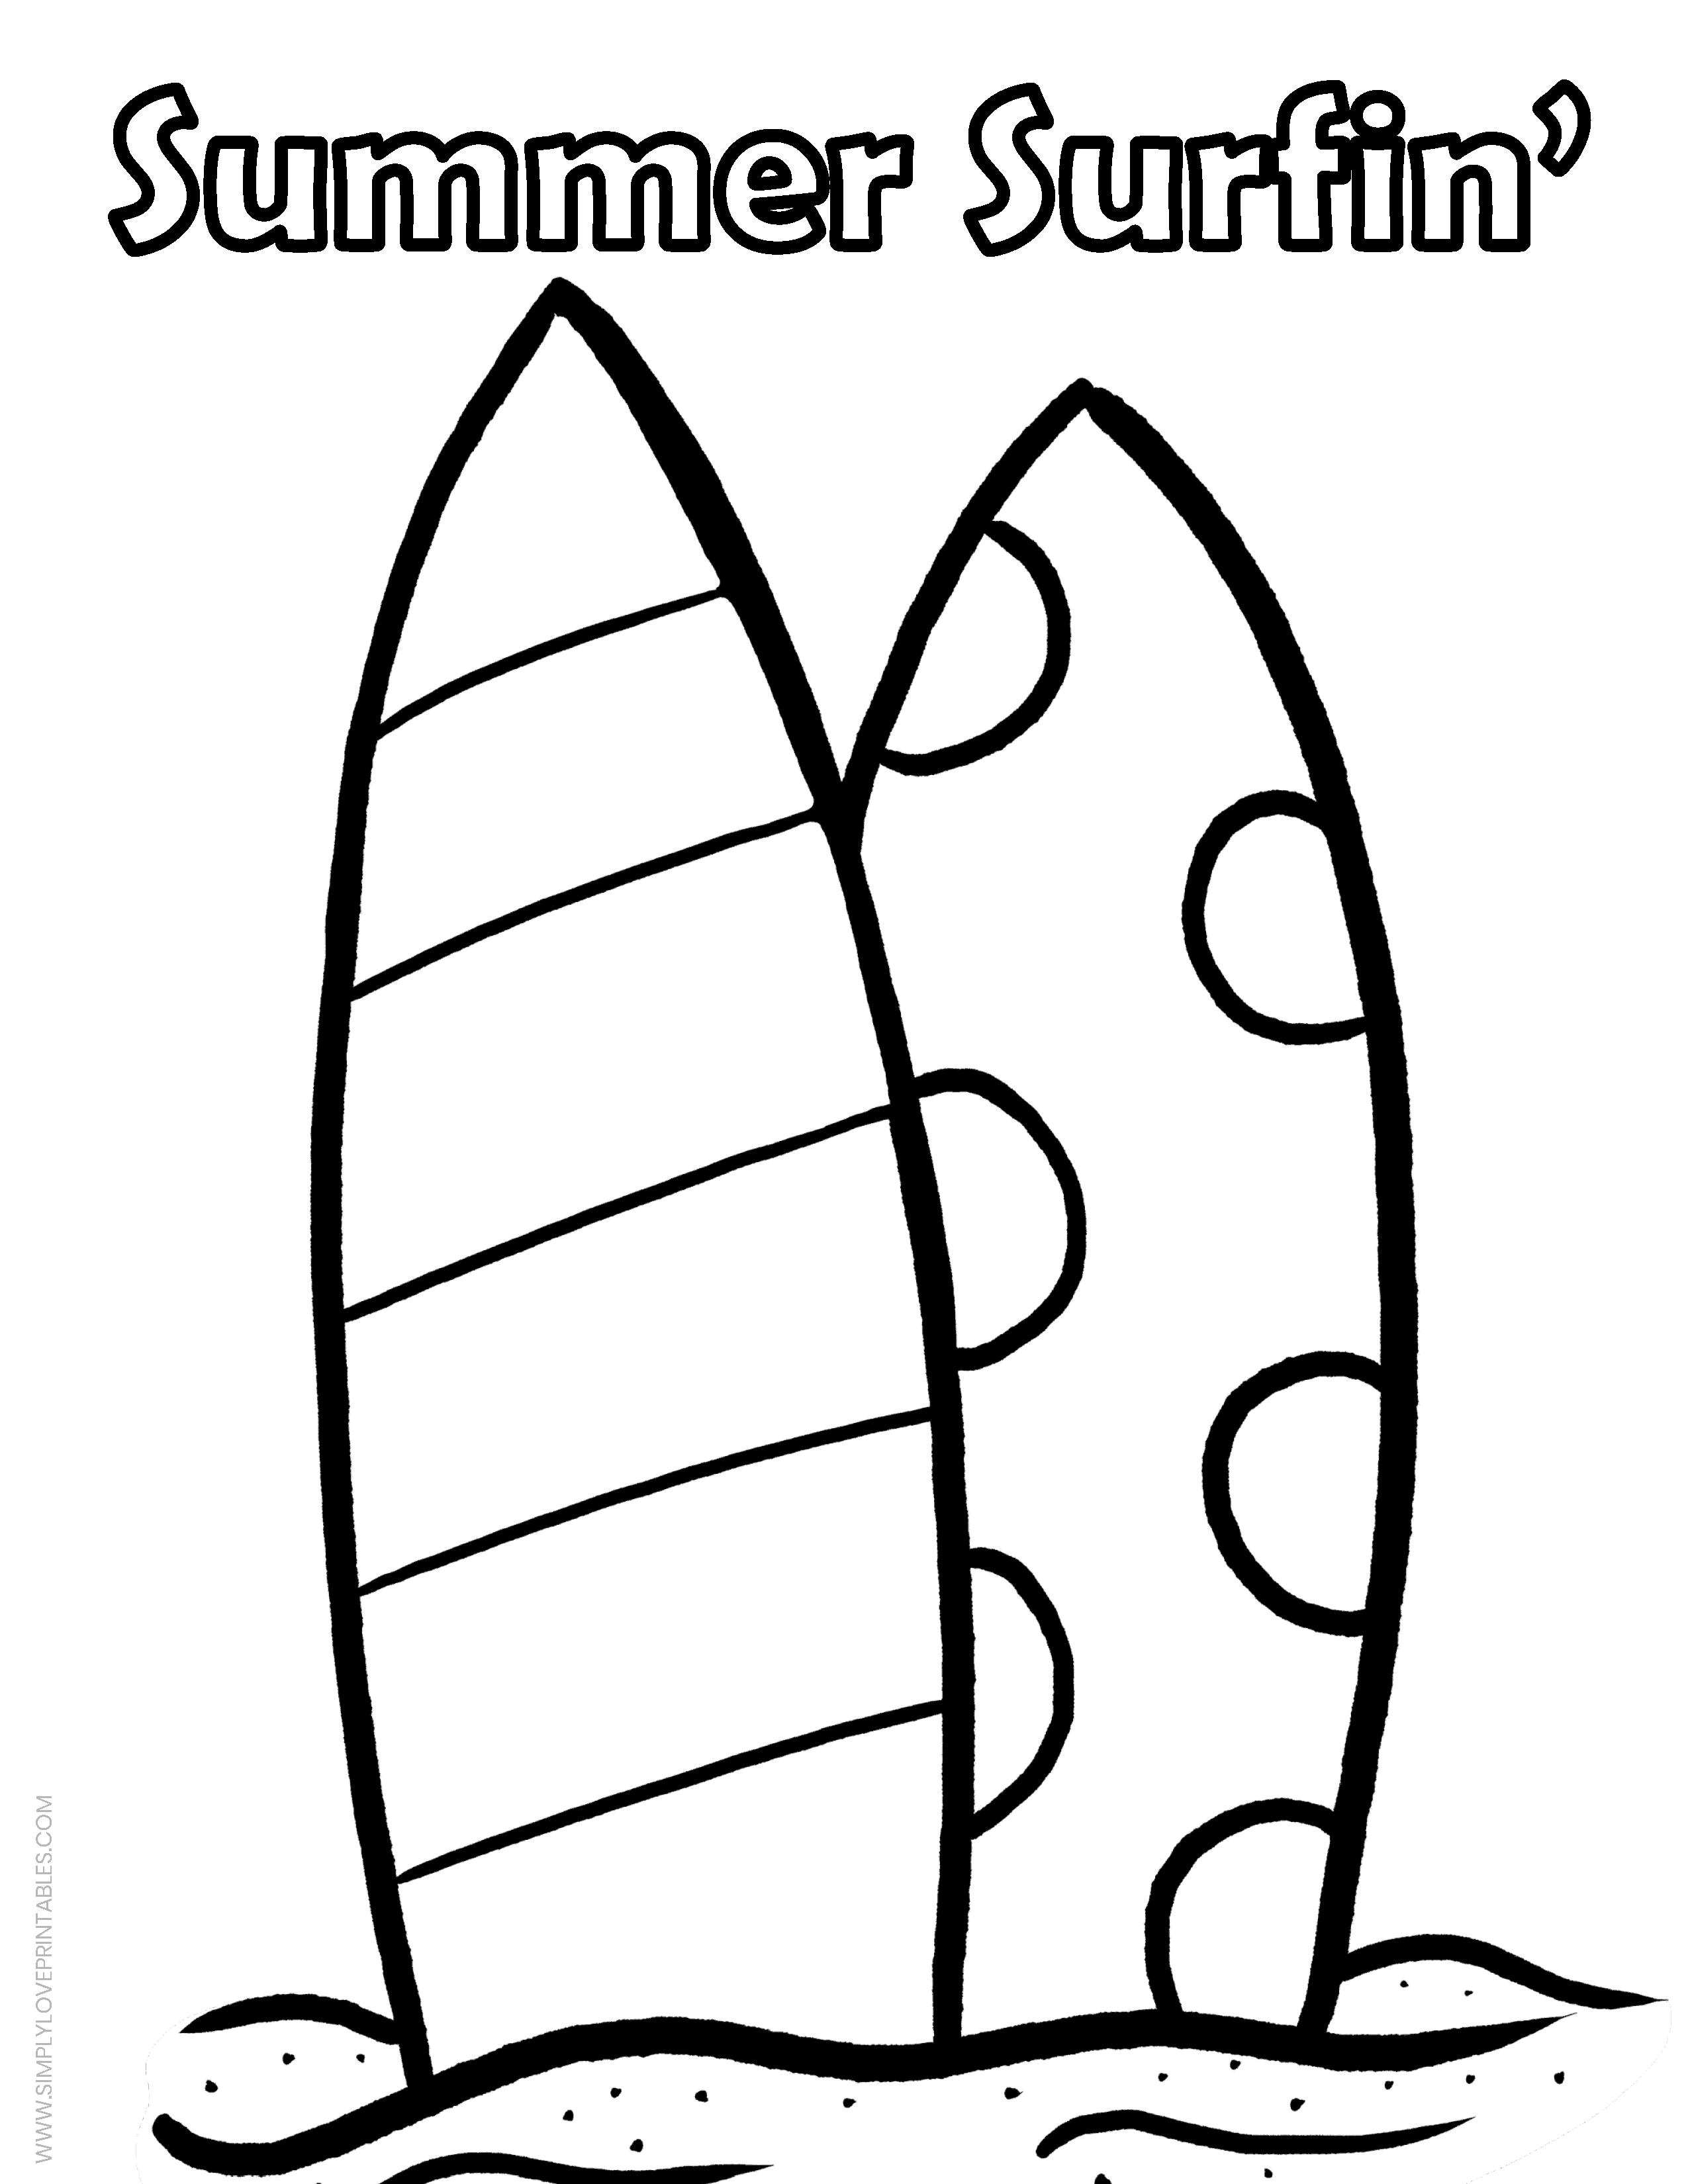 Free summer coloring pages simply love printables